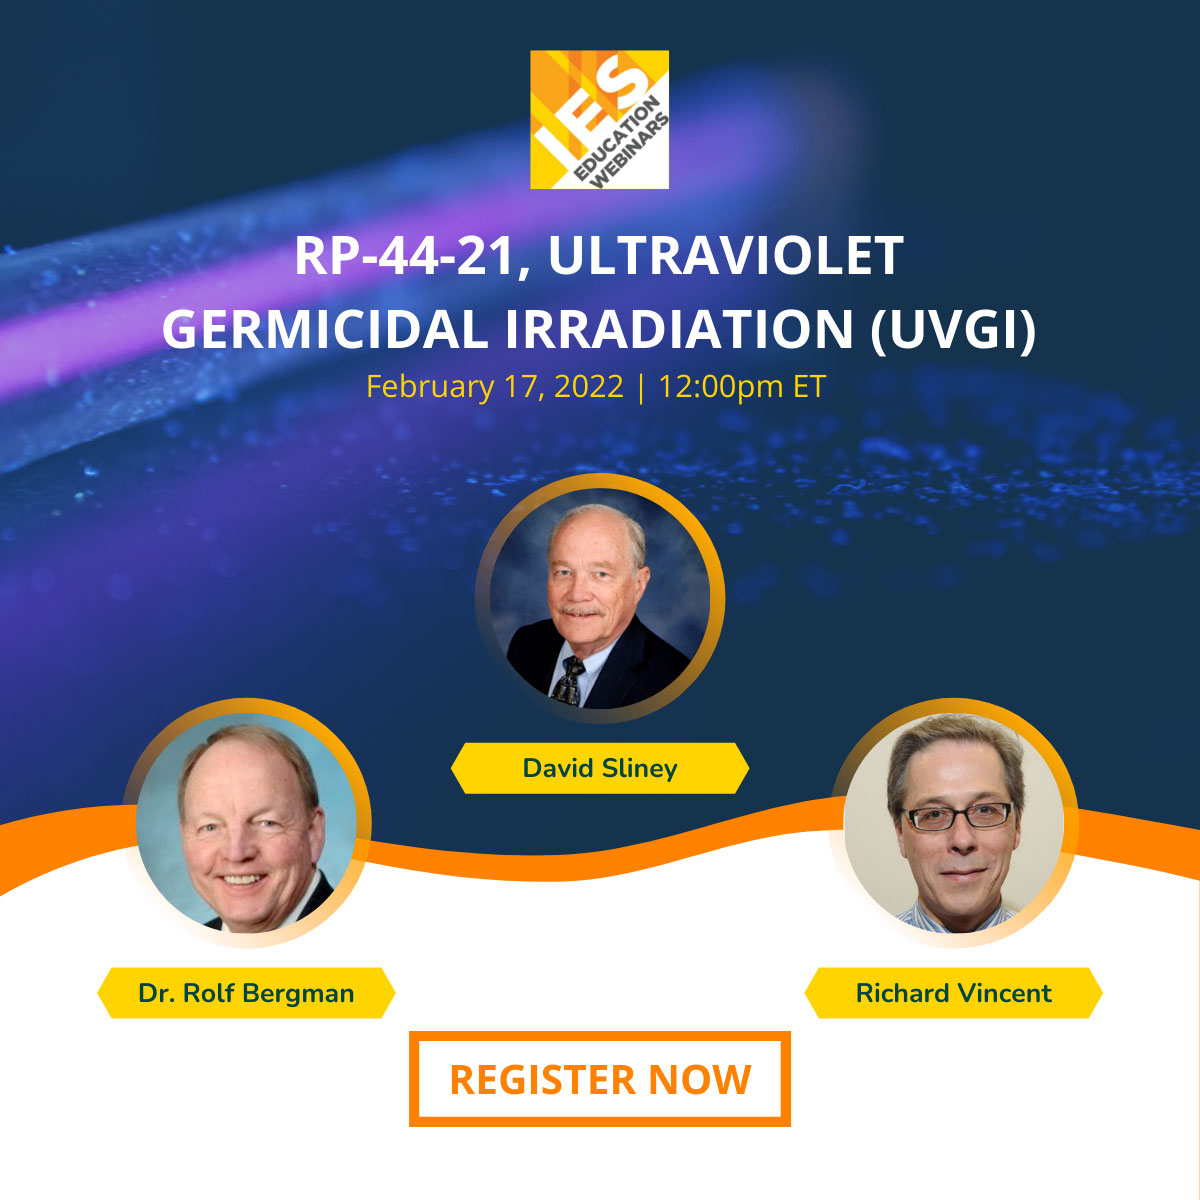 Webinar: Introduction to RP-44 on Germicidal Ultraviolet